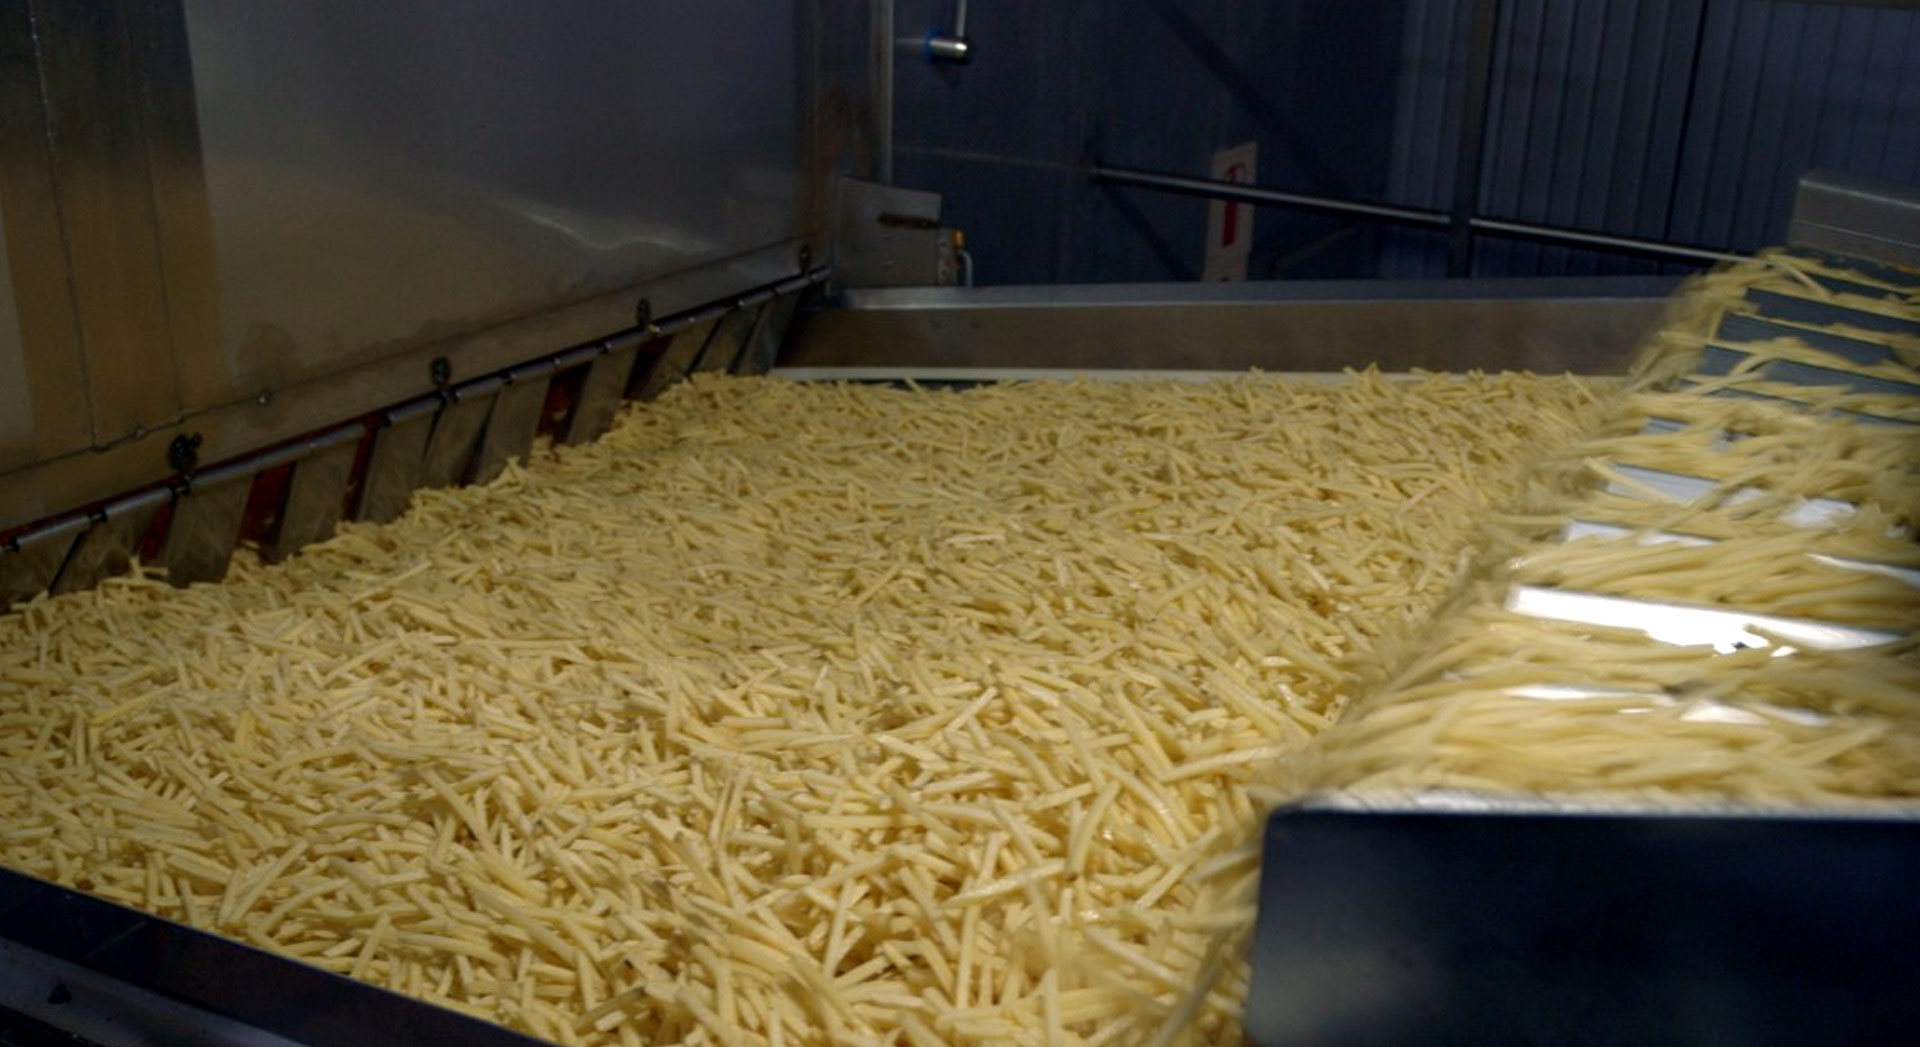 Know Our Food - Is McDonald's potato peeling process mechanical, chemical, steam, or something else when they make their French fries?